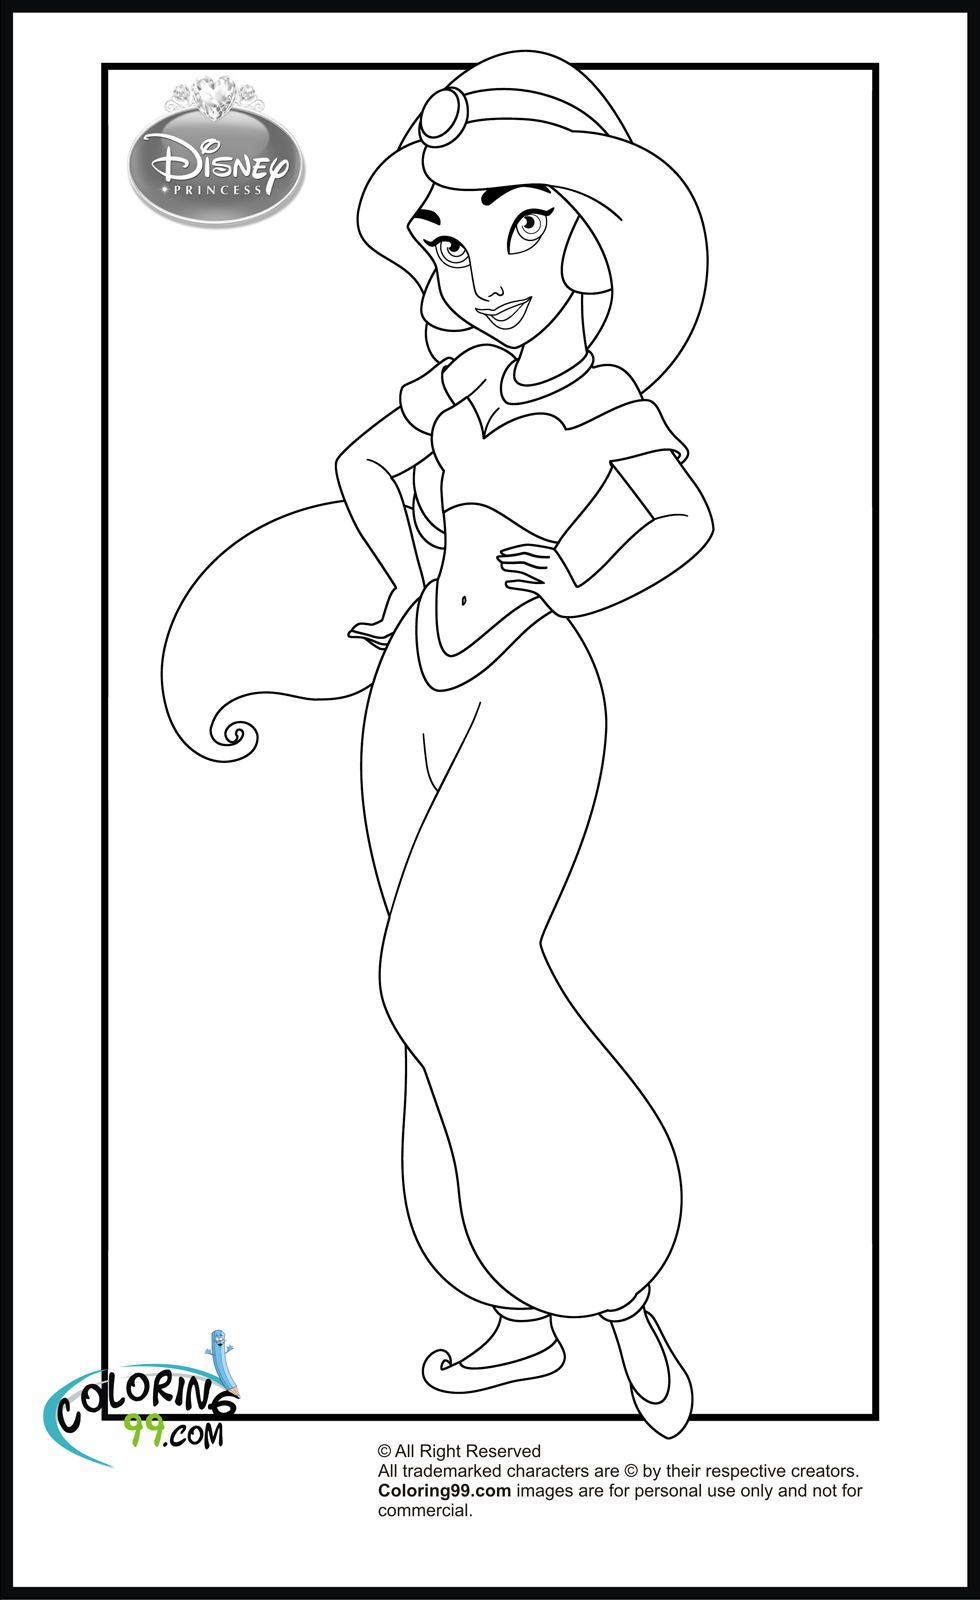 Disney Princess Coloring Pages | Minister Coloring